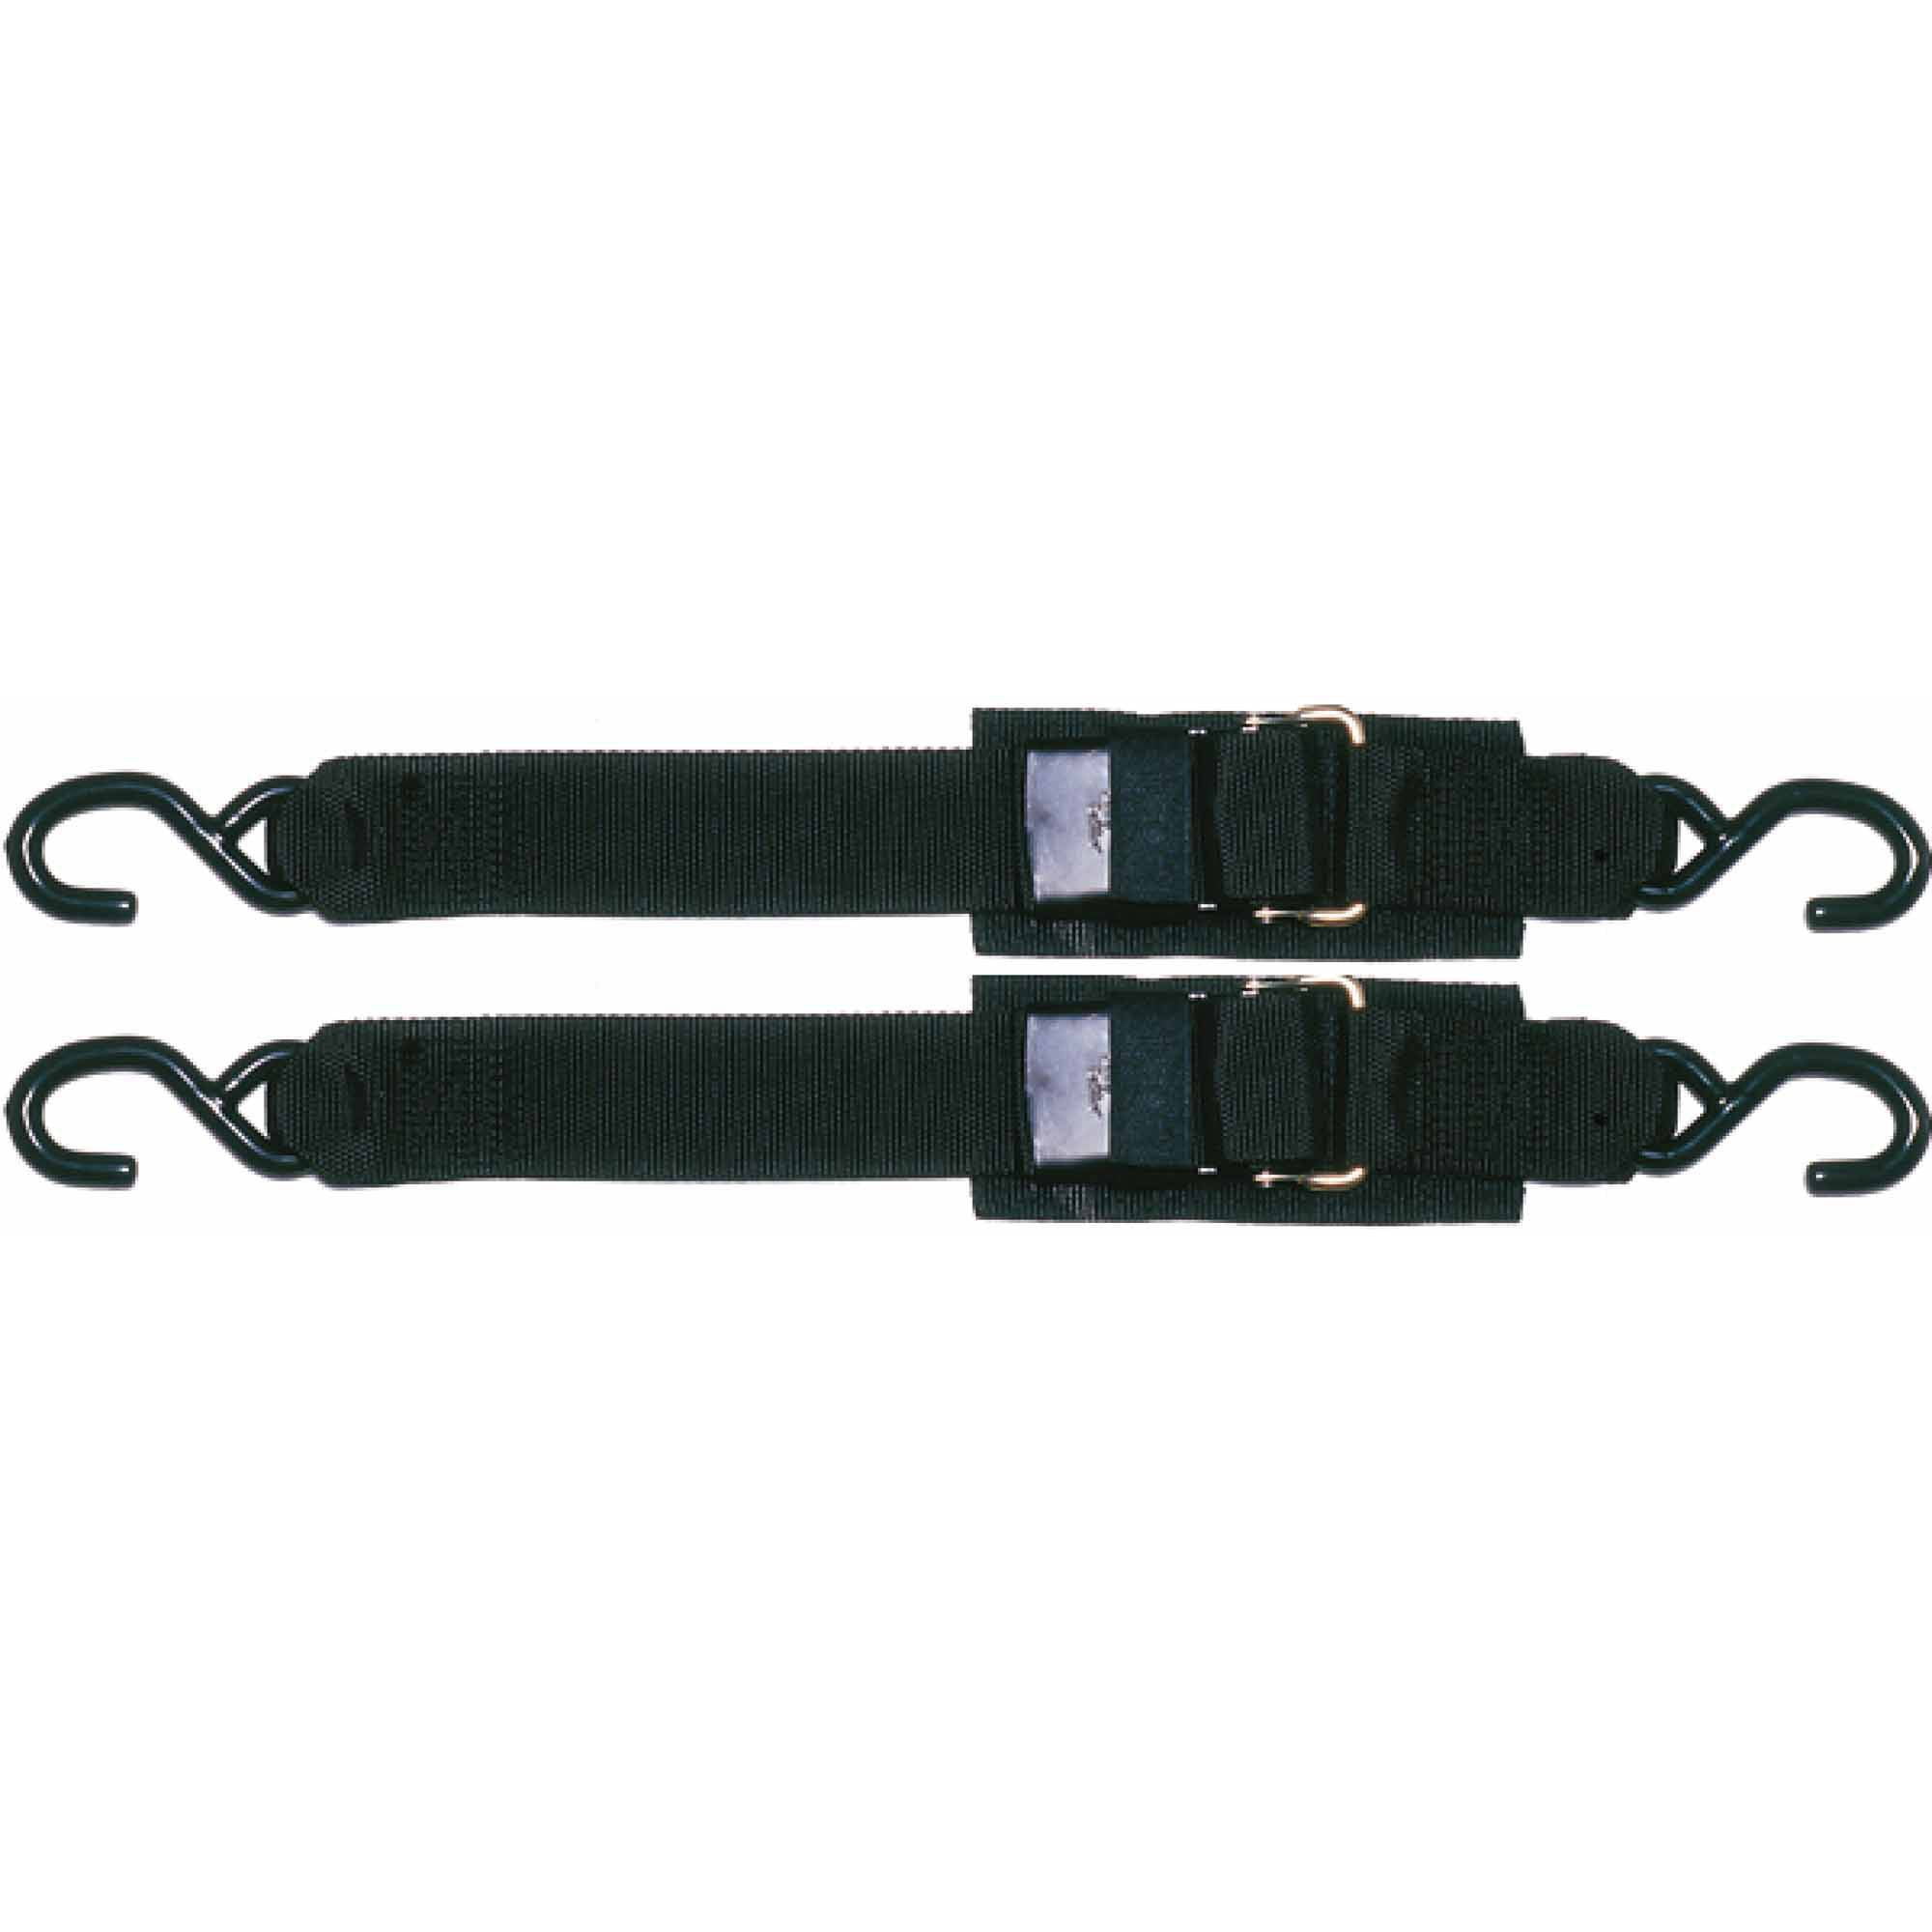 BOAT TRAILER TRANSOM TIE DOWNS 74 60069 6FT PAIR STRAPS TIEDOWNS BOATING PARTS 